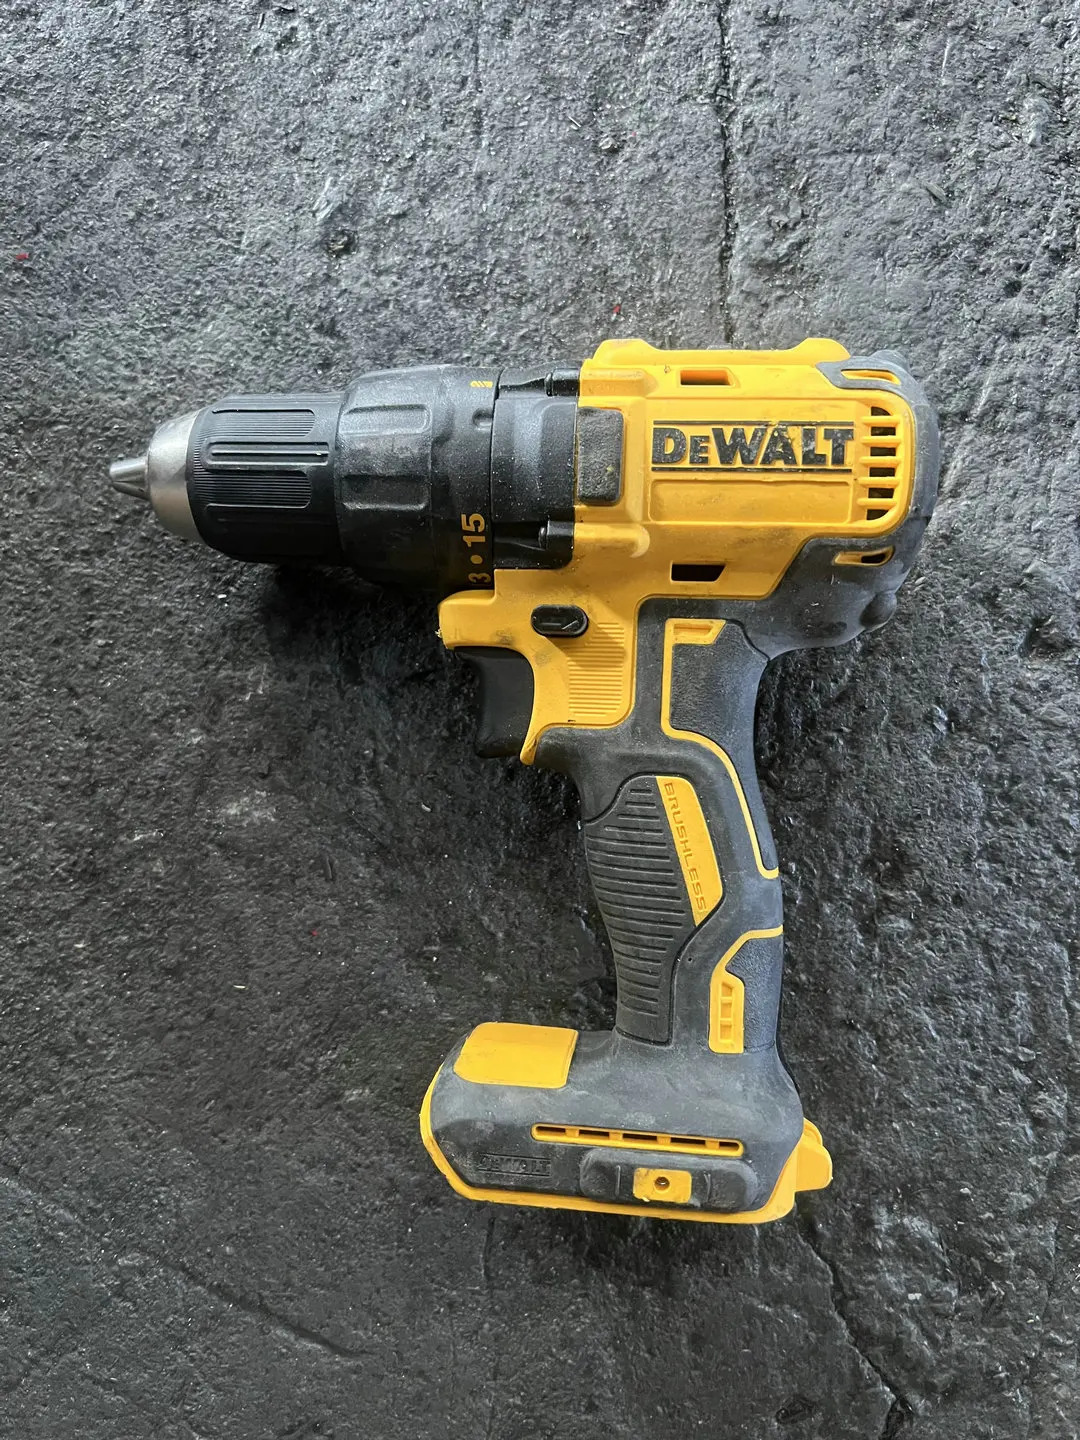 

DEWALT DCD777 20V 20 Volt Max 1/2" Compact 2-Speed Brushless Drill Driver Tools Only second-hand